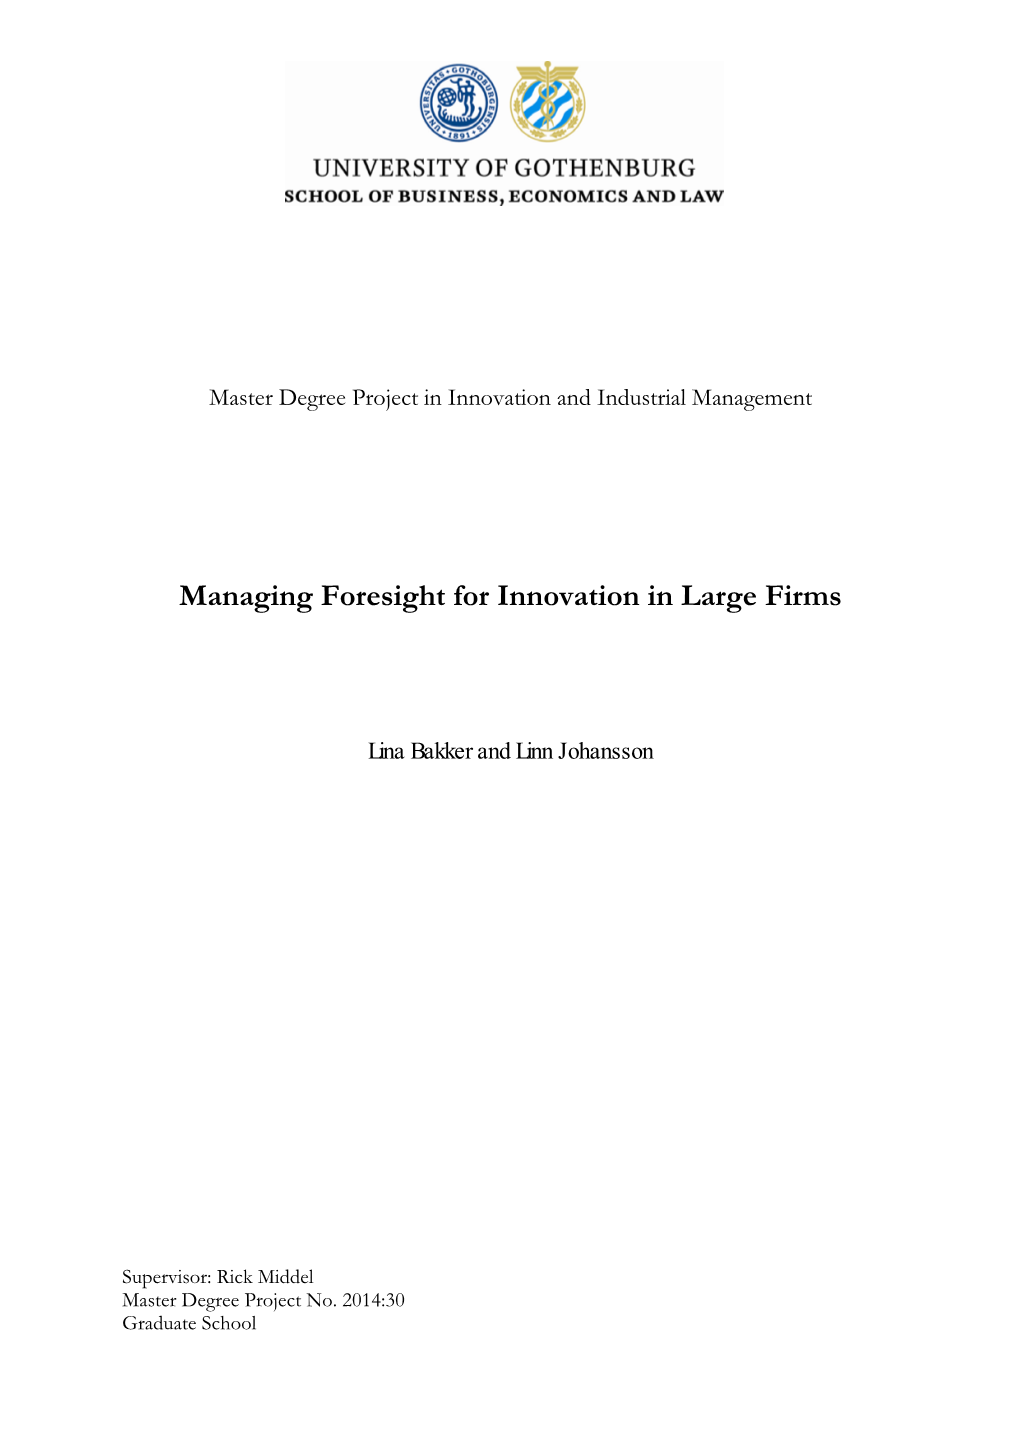 Managing Foresight for Innovation in Large Firms